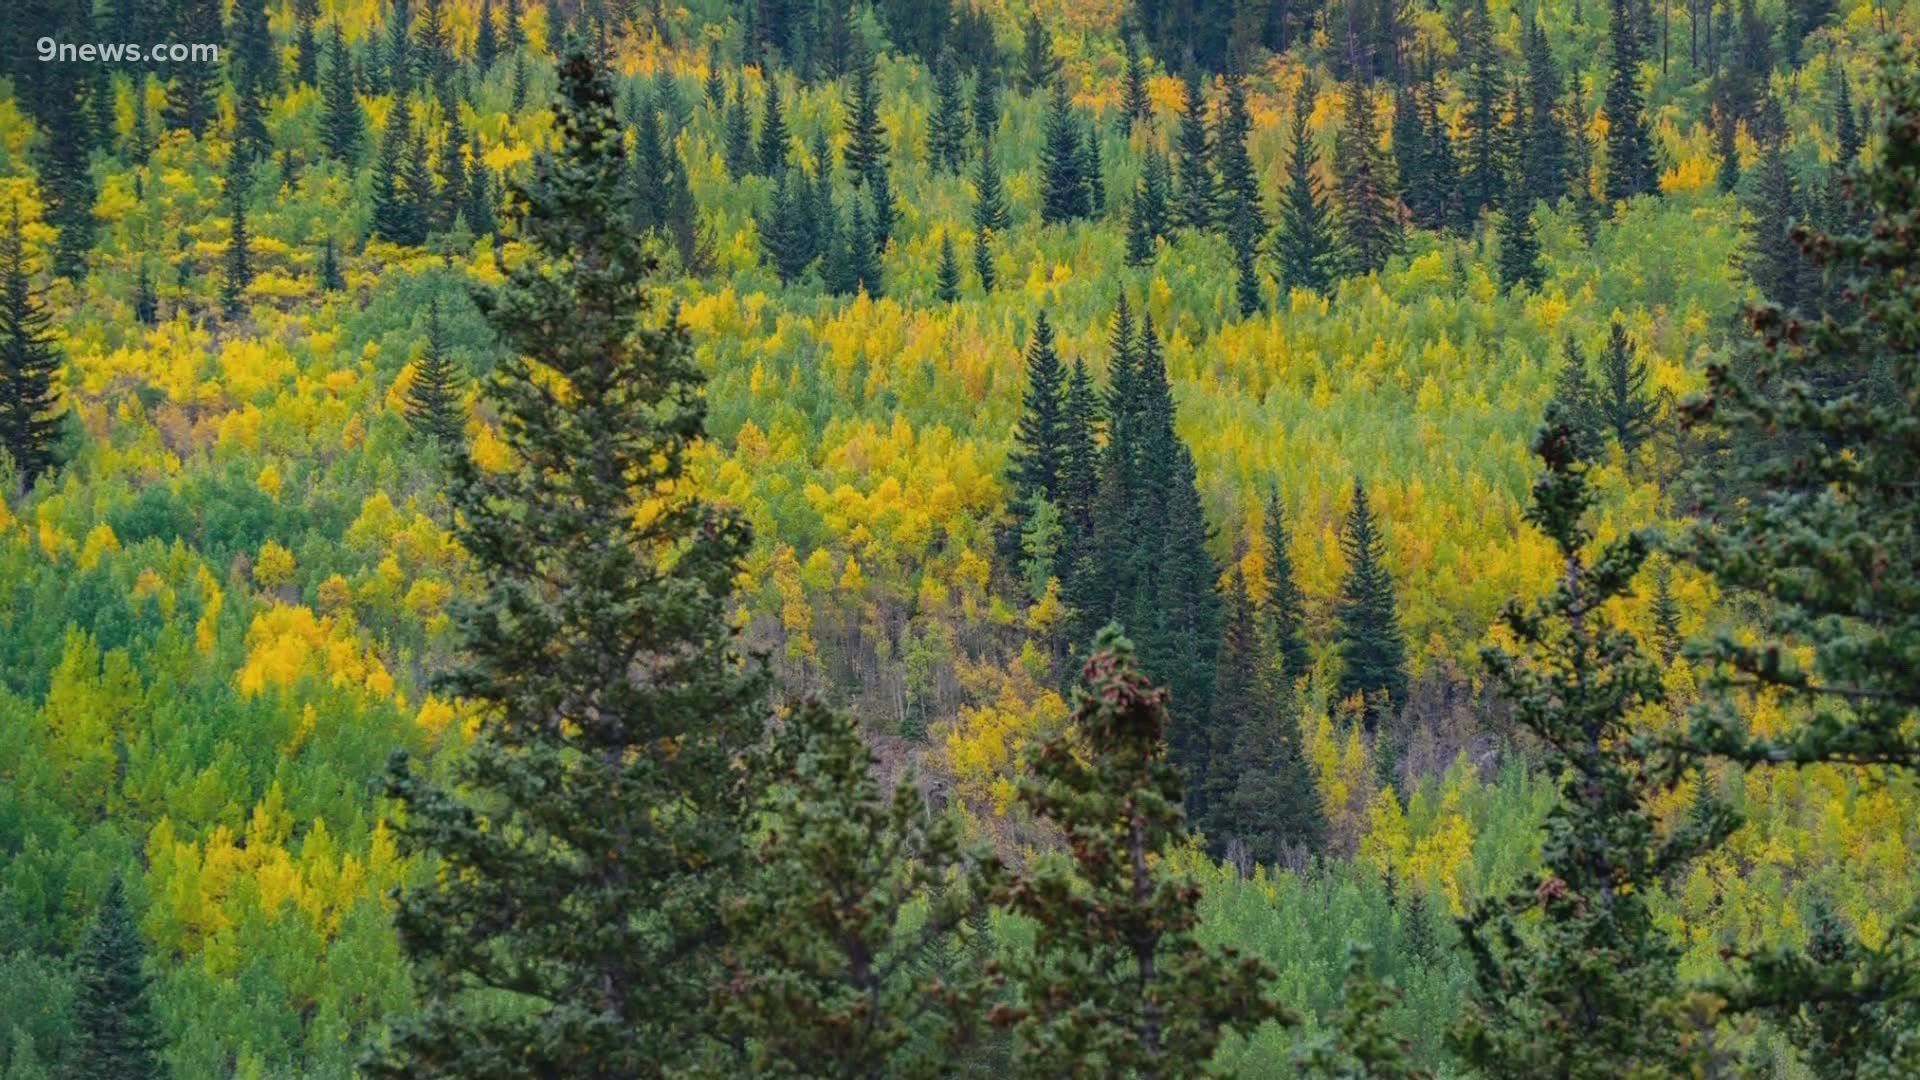 Meteorologist Cory Reppenhagen gives some pointers to hit the peak fall colors in Colorado.